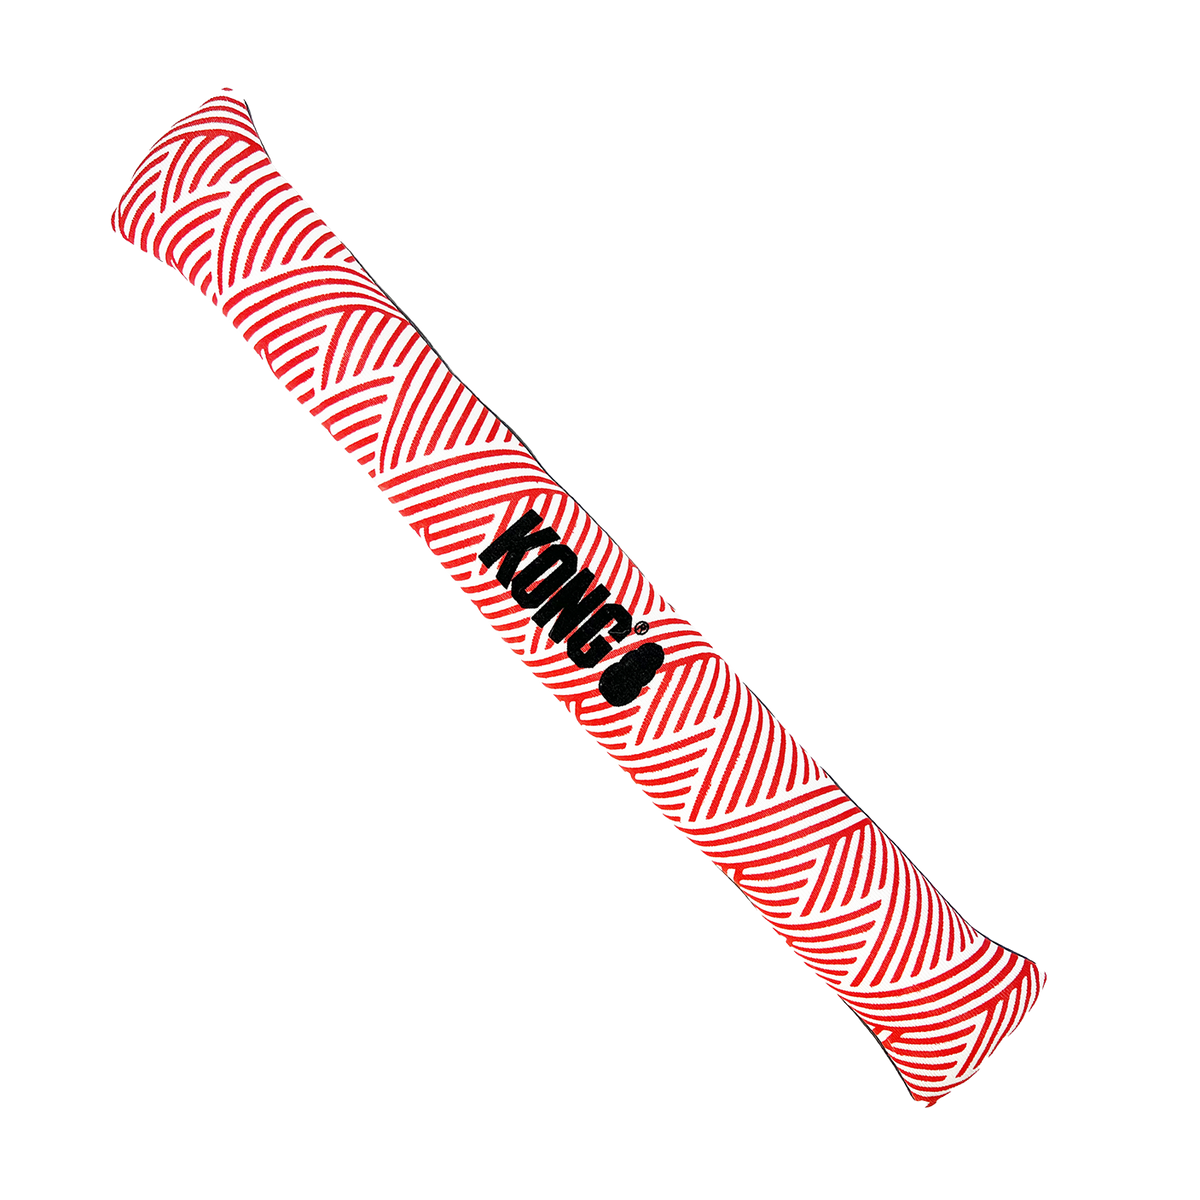 Maxx Stick With Squeaker -Flat Fabric Resists Puncture